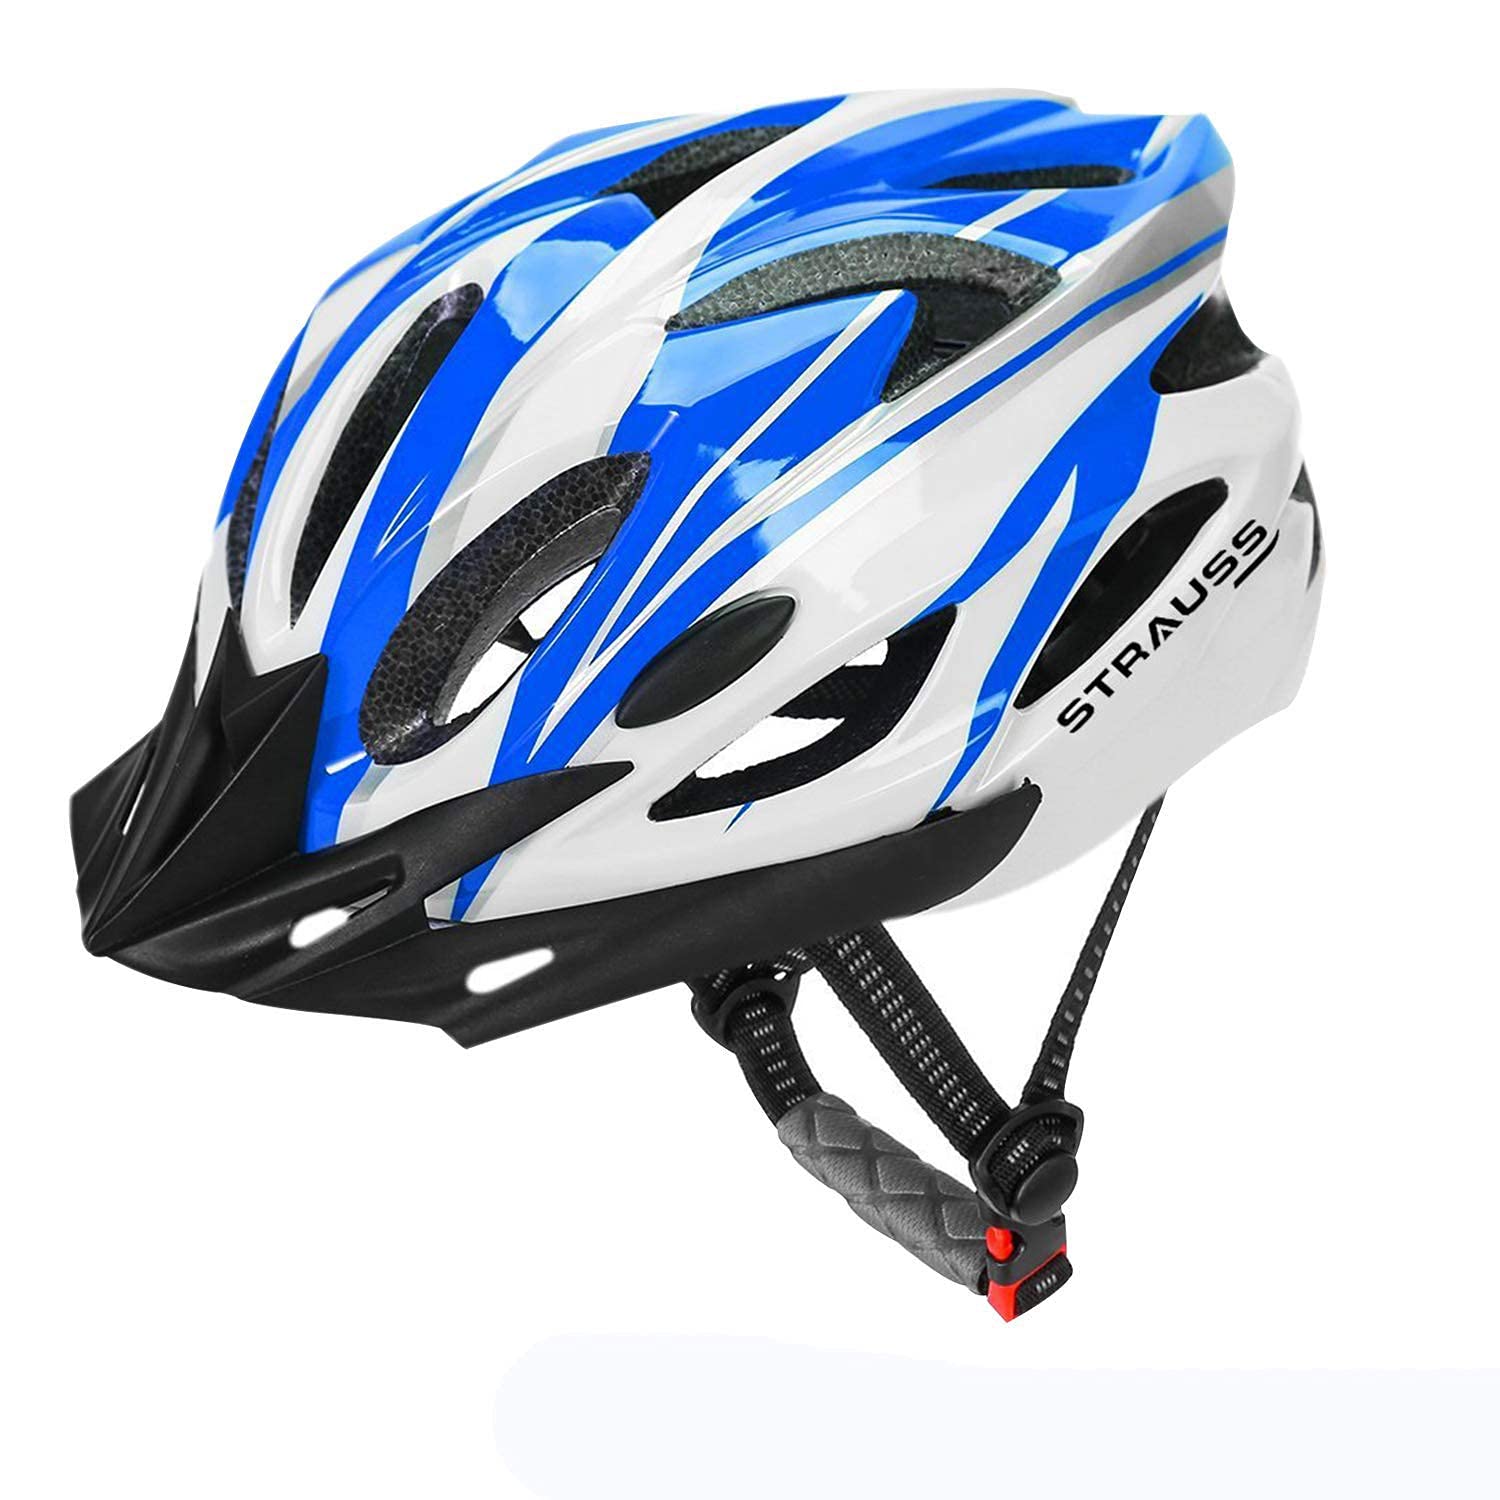 Strauss Cycling Helmet, (White/Blue) with Offroad Bike Goggles, (Black)